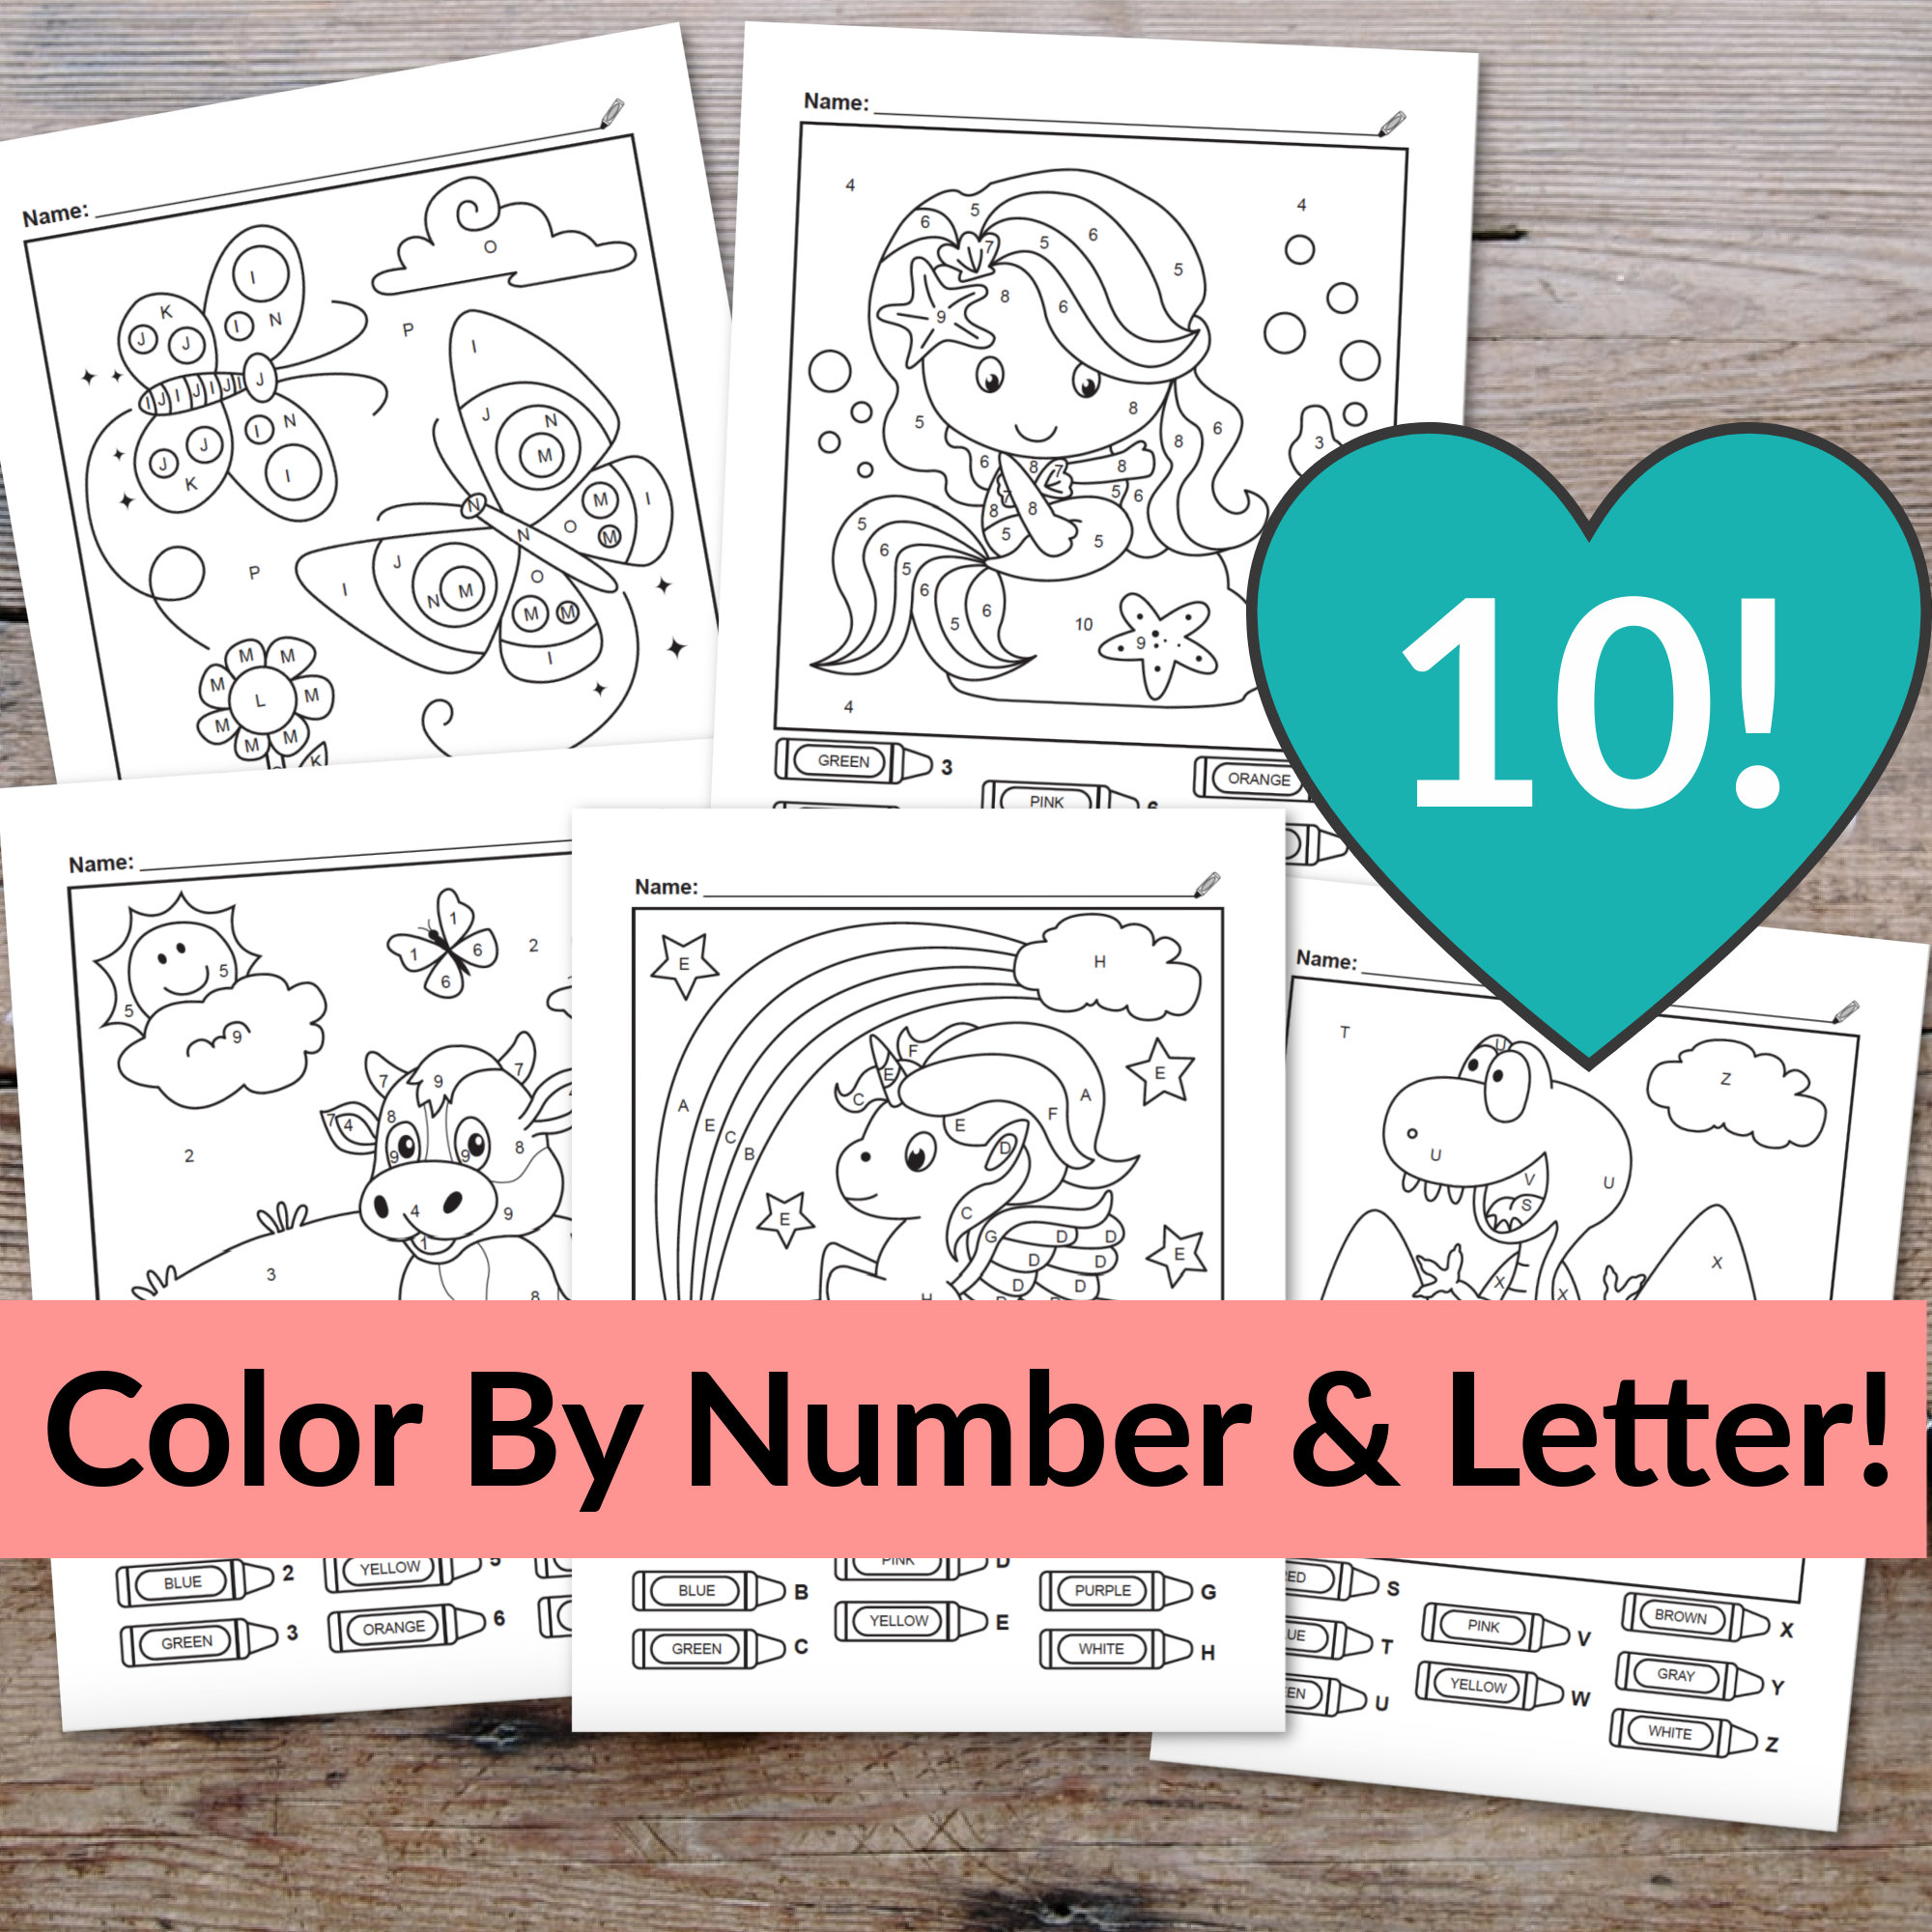 10 Printable Color by Number & Color by Letter Worksheets for | Etsy